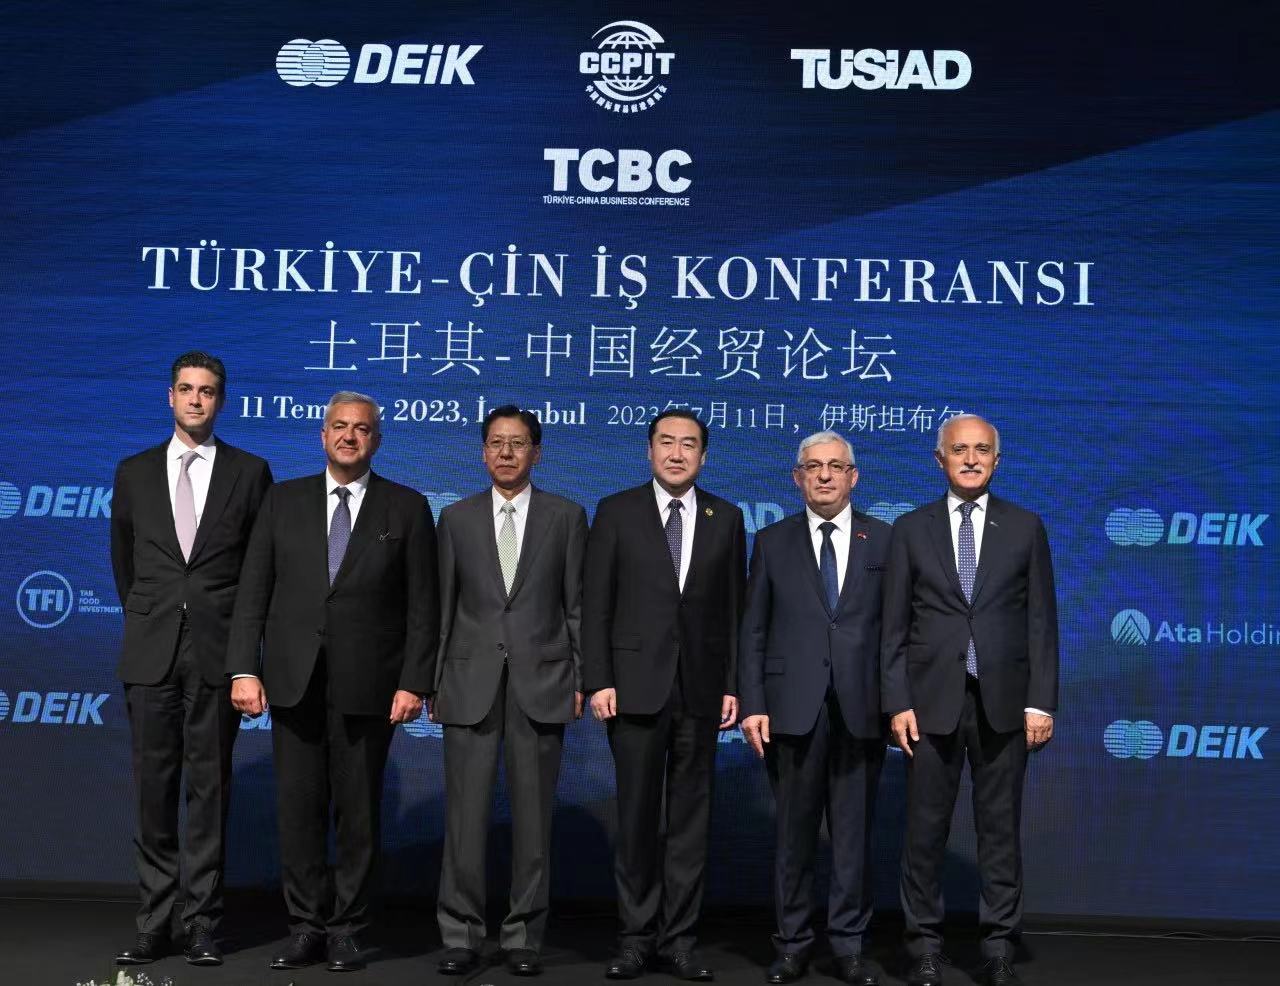 Chinese Ambassador to Turkey Liu Shaobin (third left), vice chairman of China Council for the Promotion of International Trade (CCPIT) Zhang Shaogang (third right) and Turkish Ambassador to China, Ismail Hakki Musa (second right) Photo: Courtesy of the Turkish Embassy in Beijing